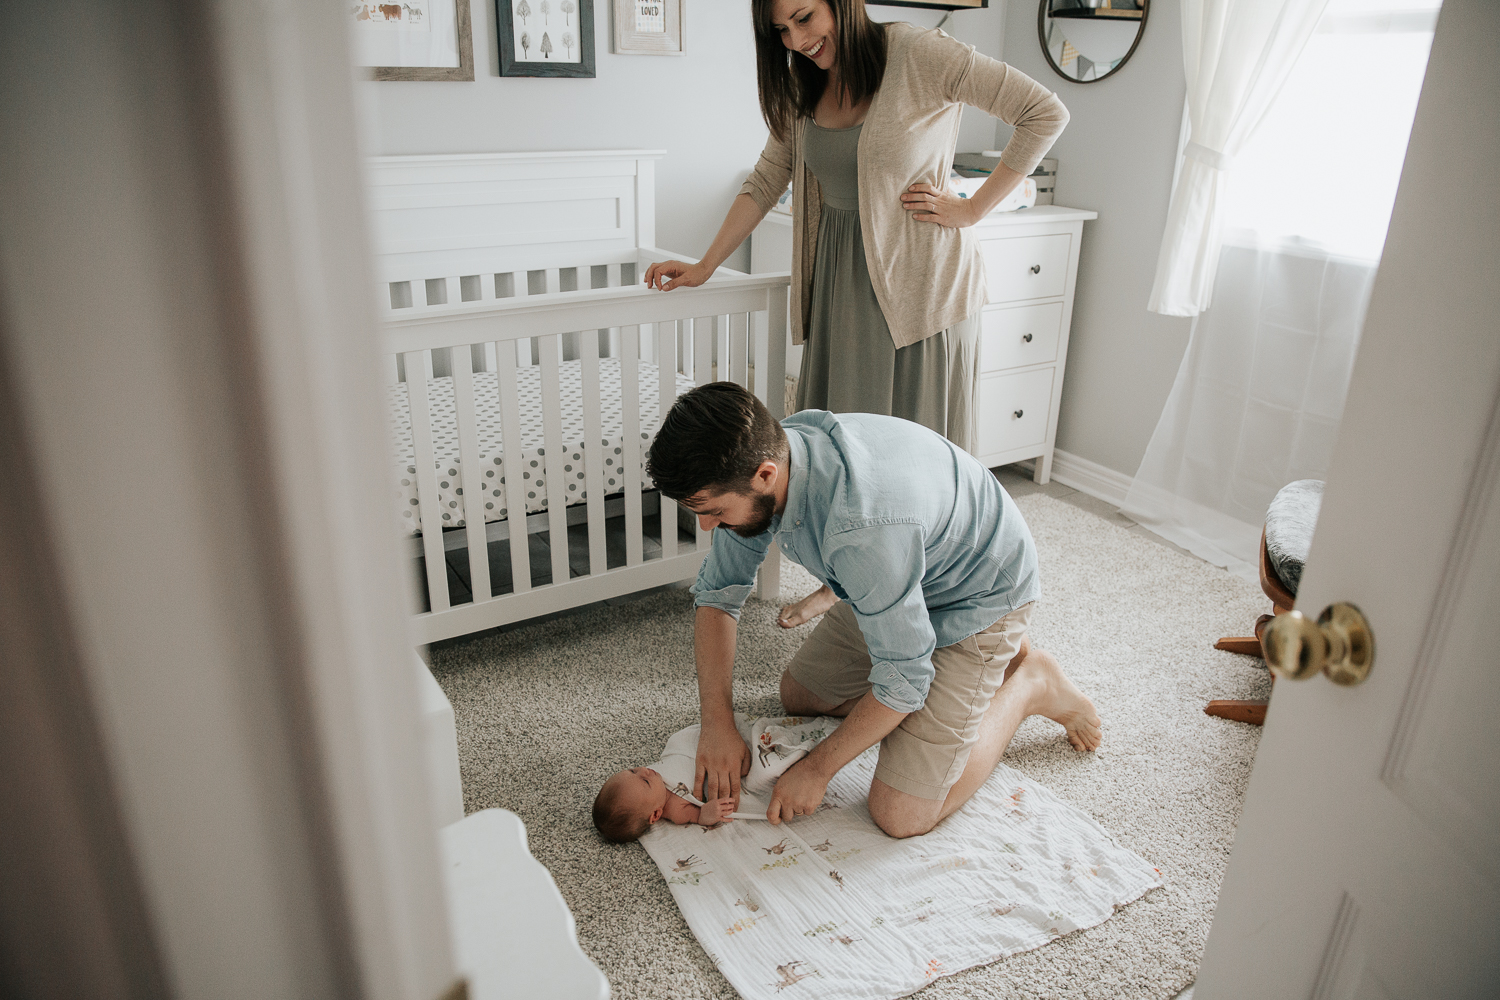 first time dad crouching on ground swaddling 3 week old baby boy on nursery floor while mom leans on crib watching and smiling - Newmarket Lifestyle Photography